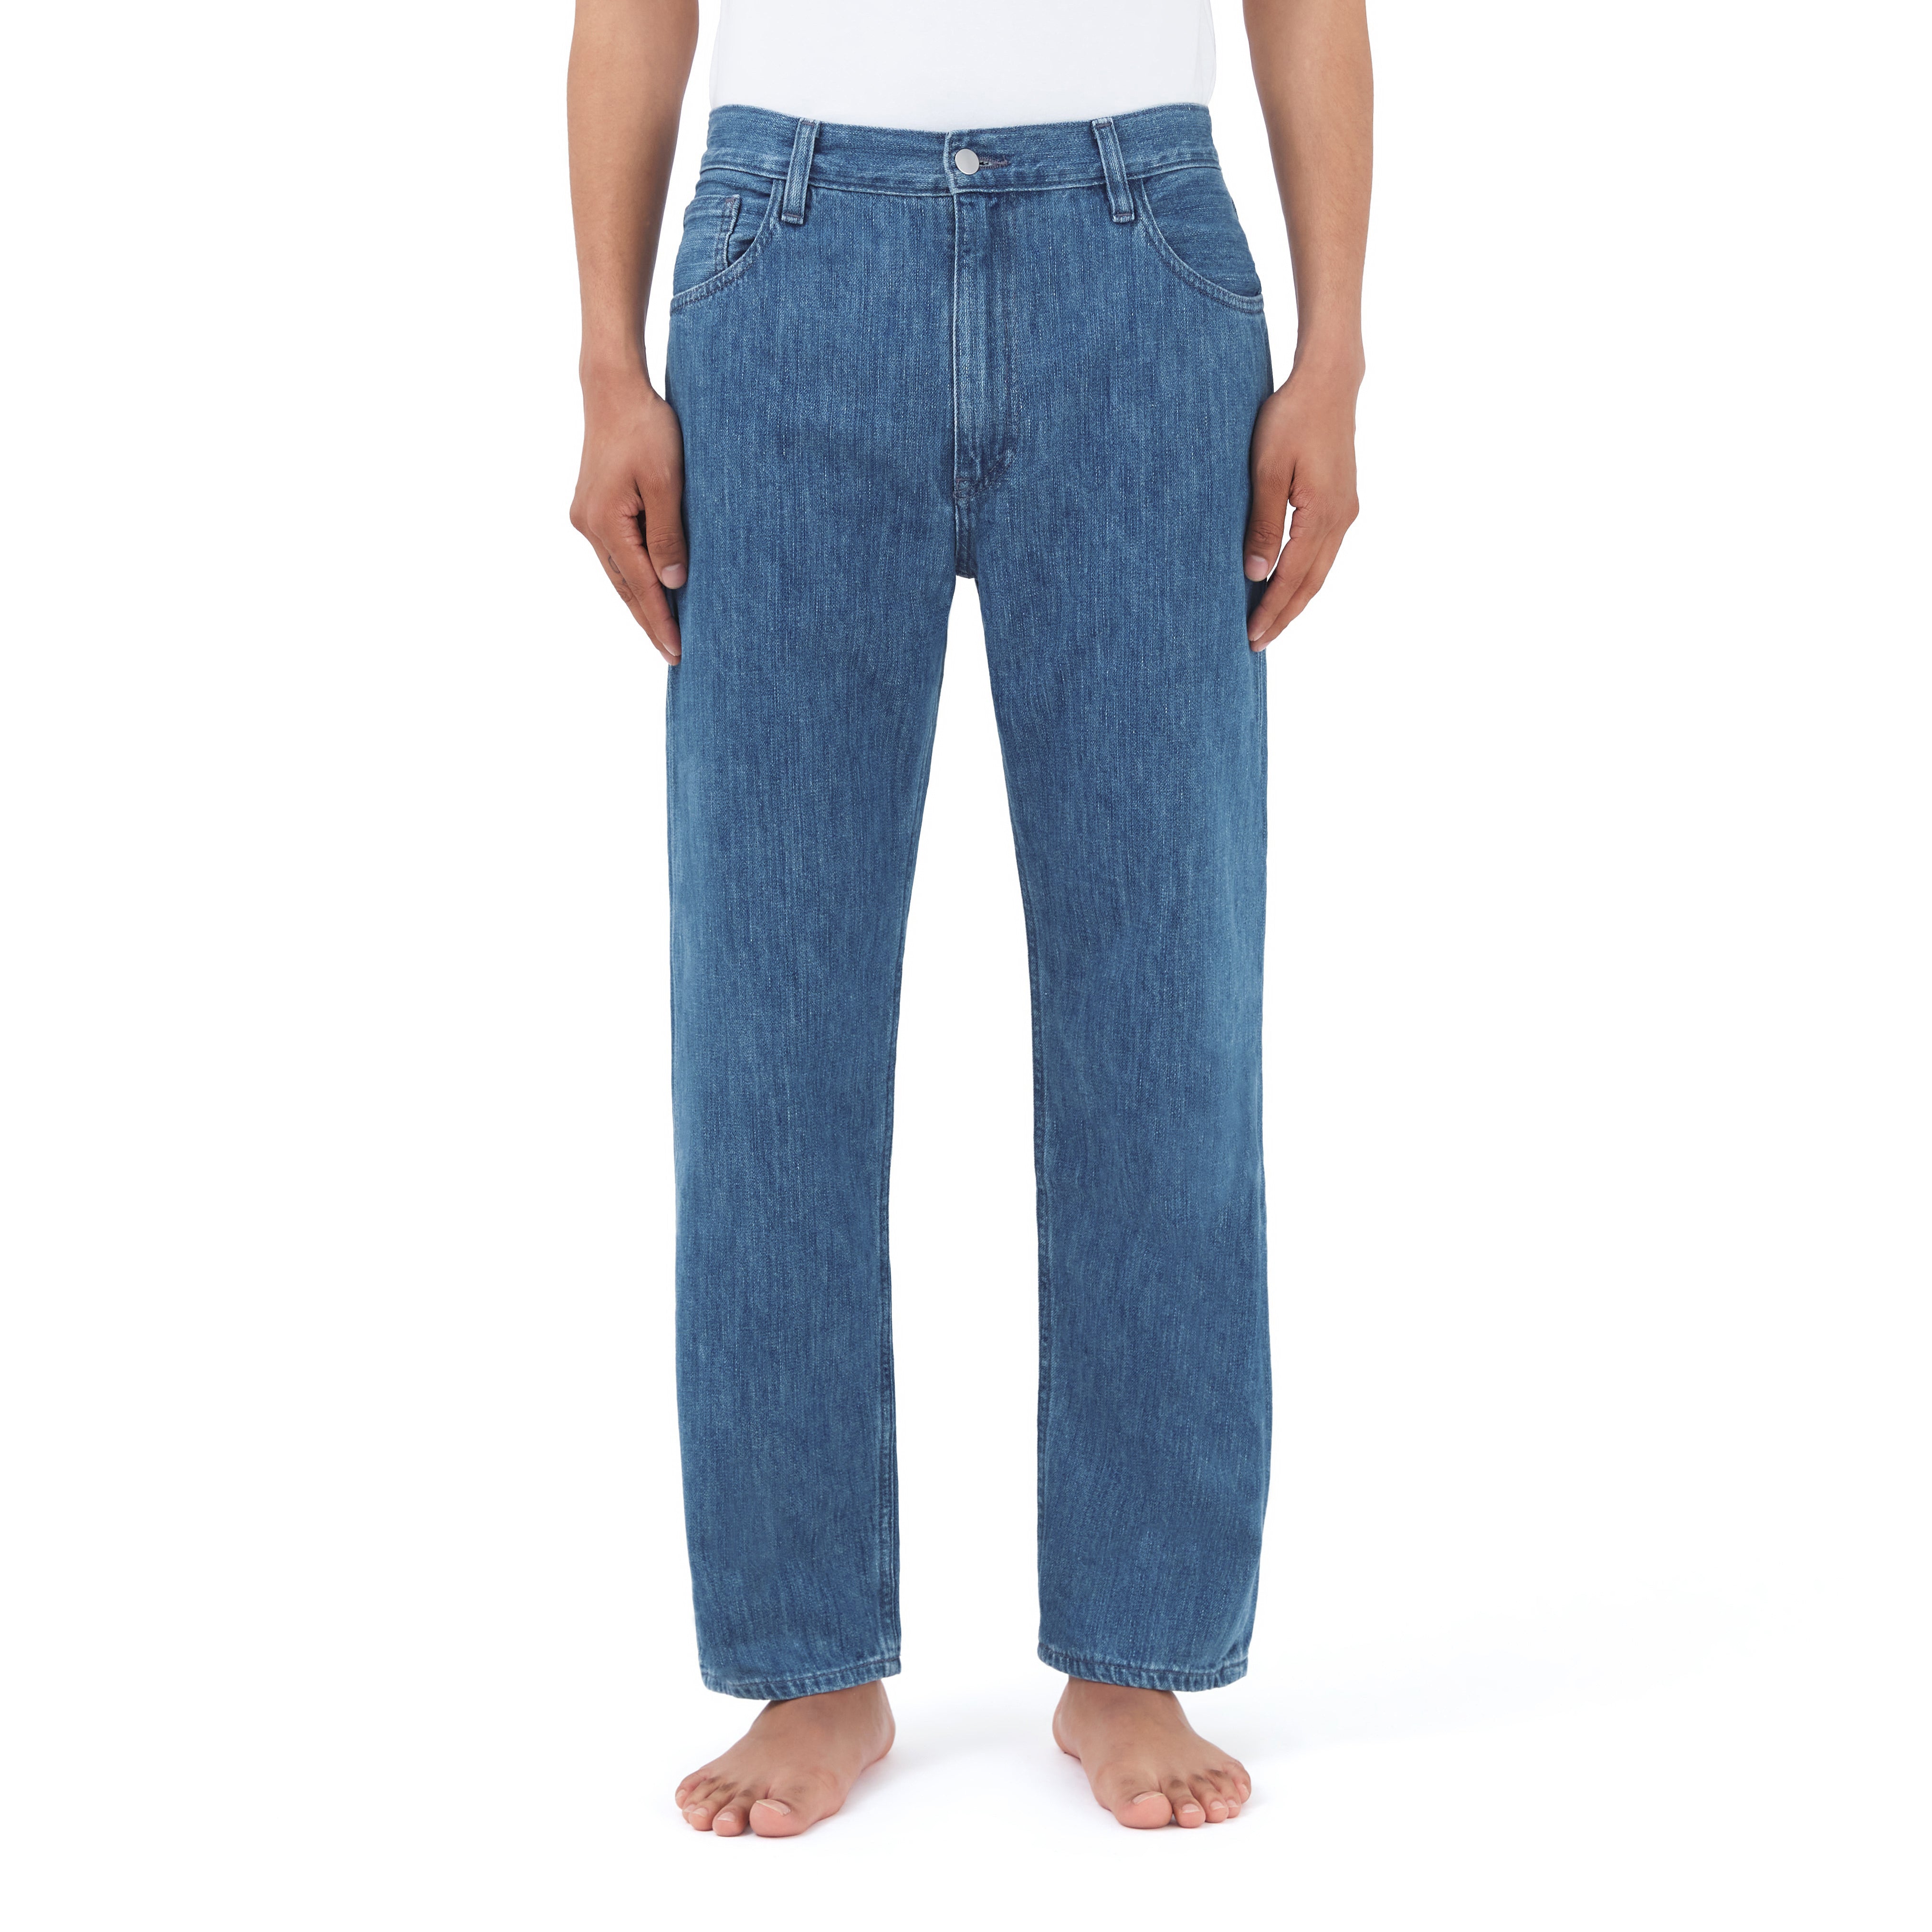 Relaxed Fit Organic Jean in Eco Stone Wash Selvedge Denim